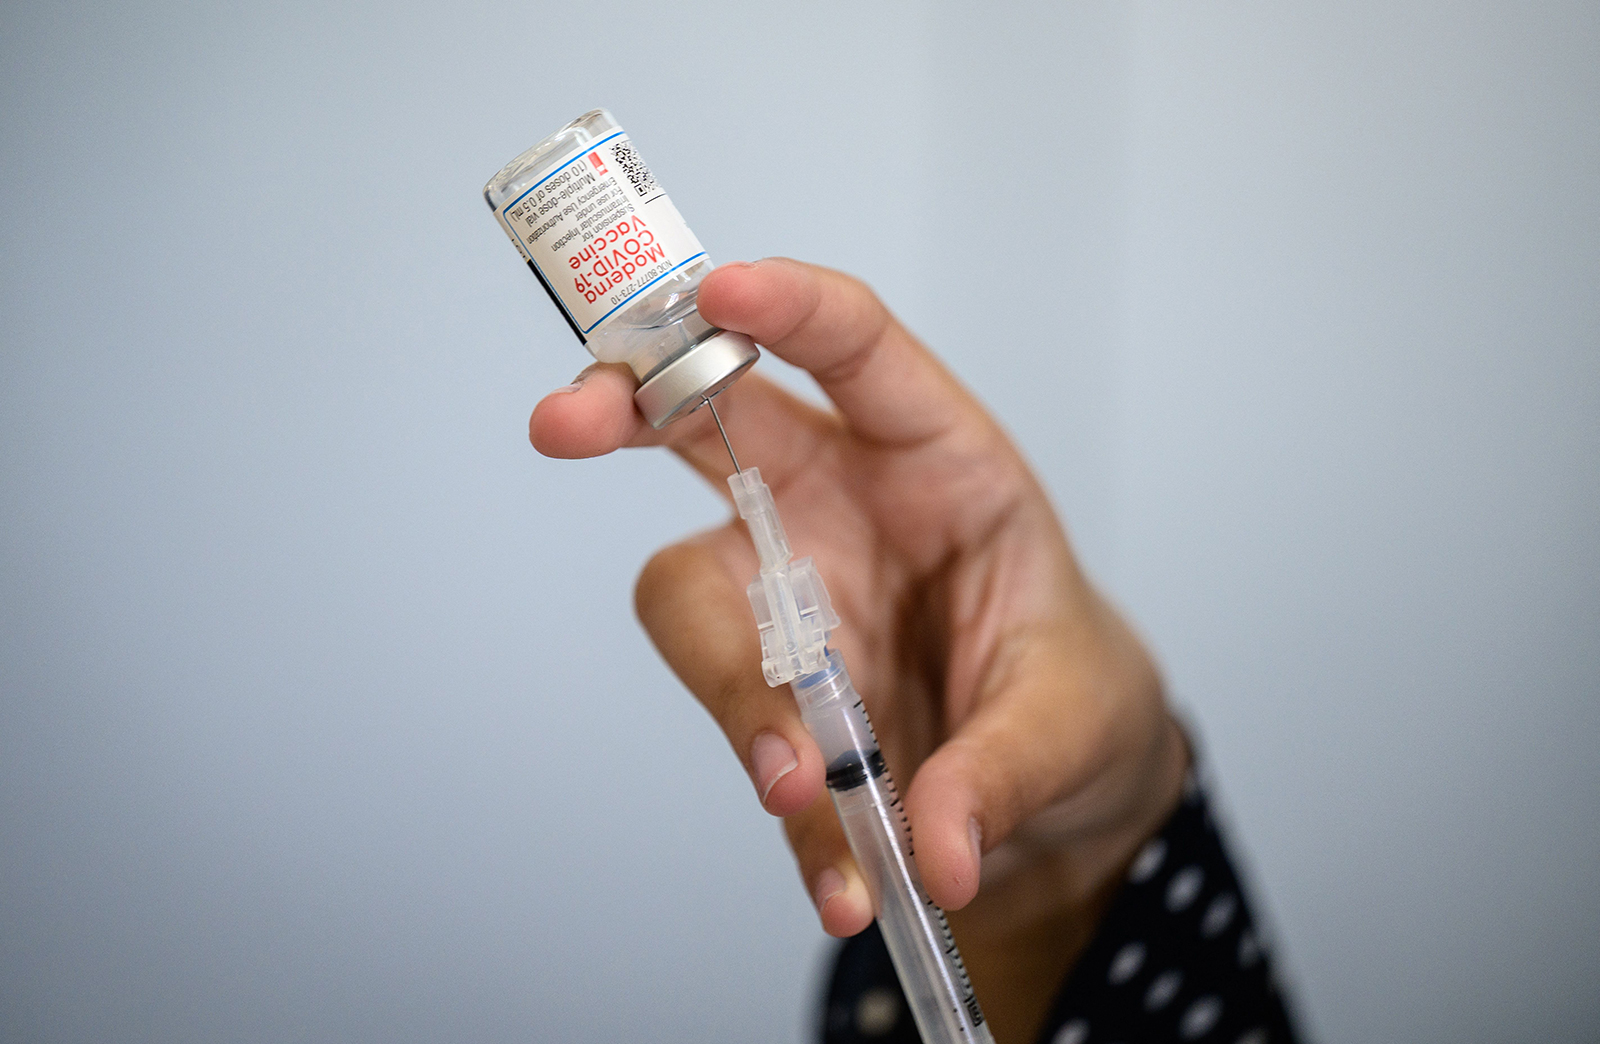 A medical staff member prepares a syringe with a vial of the Moderna Covid-19 vaccine at a pop up vaccine clinic in the Staten Island borough of New York City, on April 16.